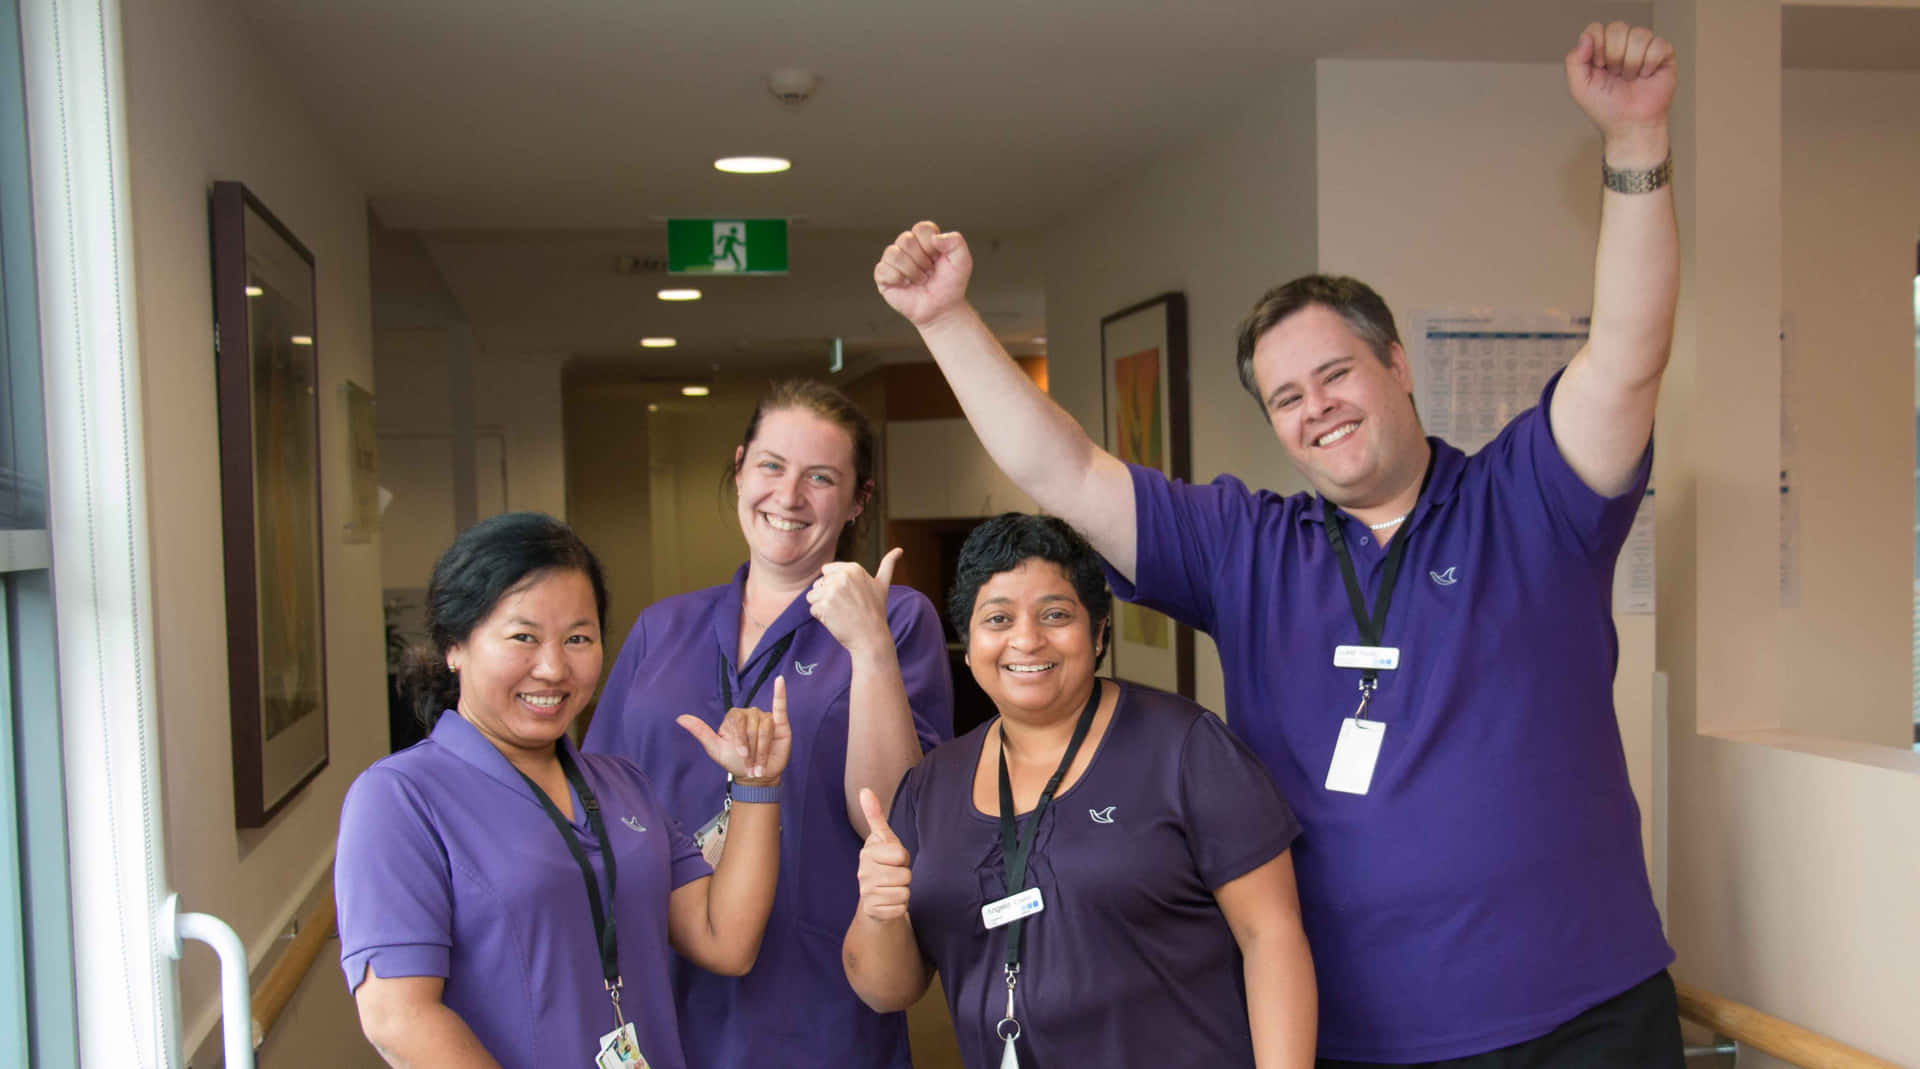 Four Nurses In Purple Shirts Standing In A Hallway